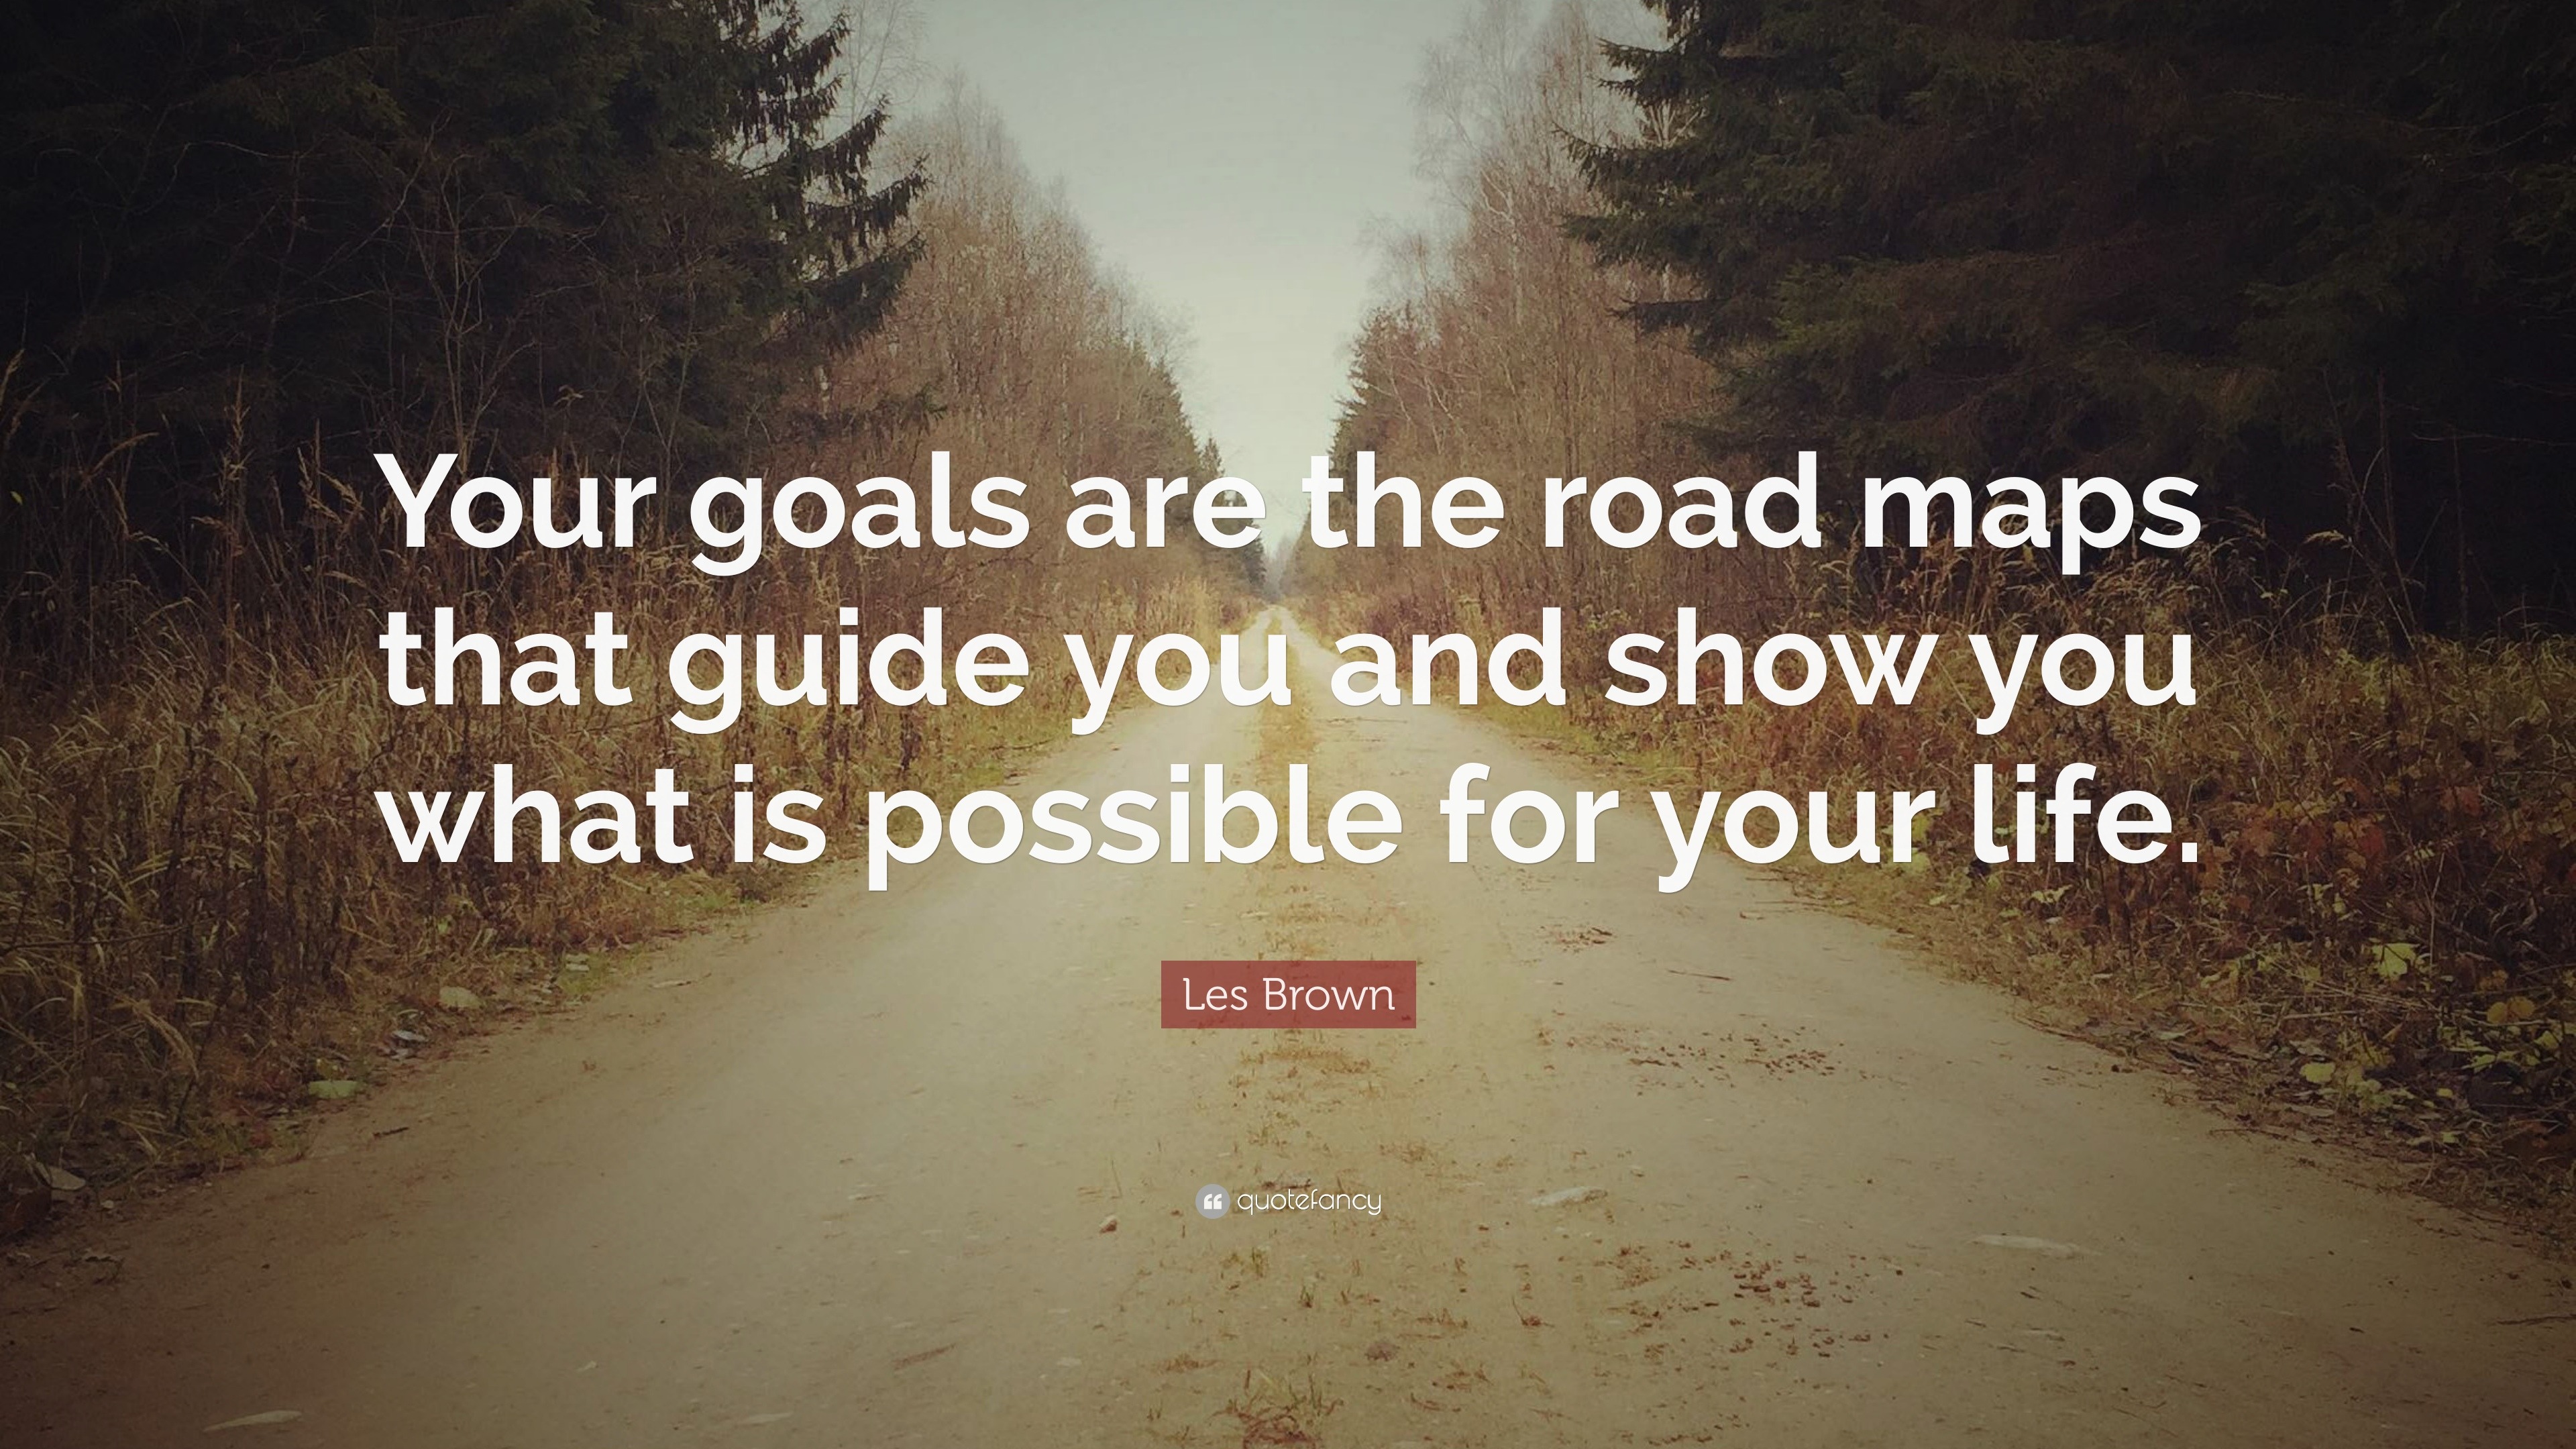 Les Brown Quote: "Your goals are the road maps that guide you and show you what is possible for ...